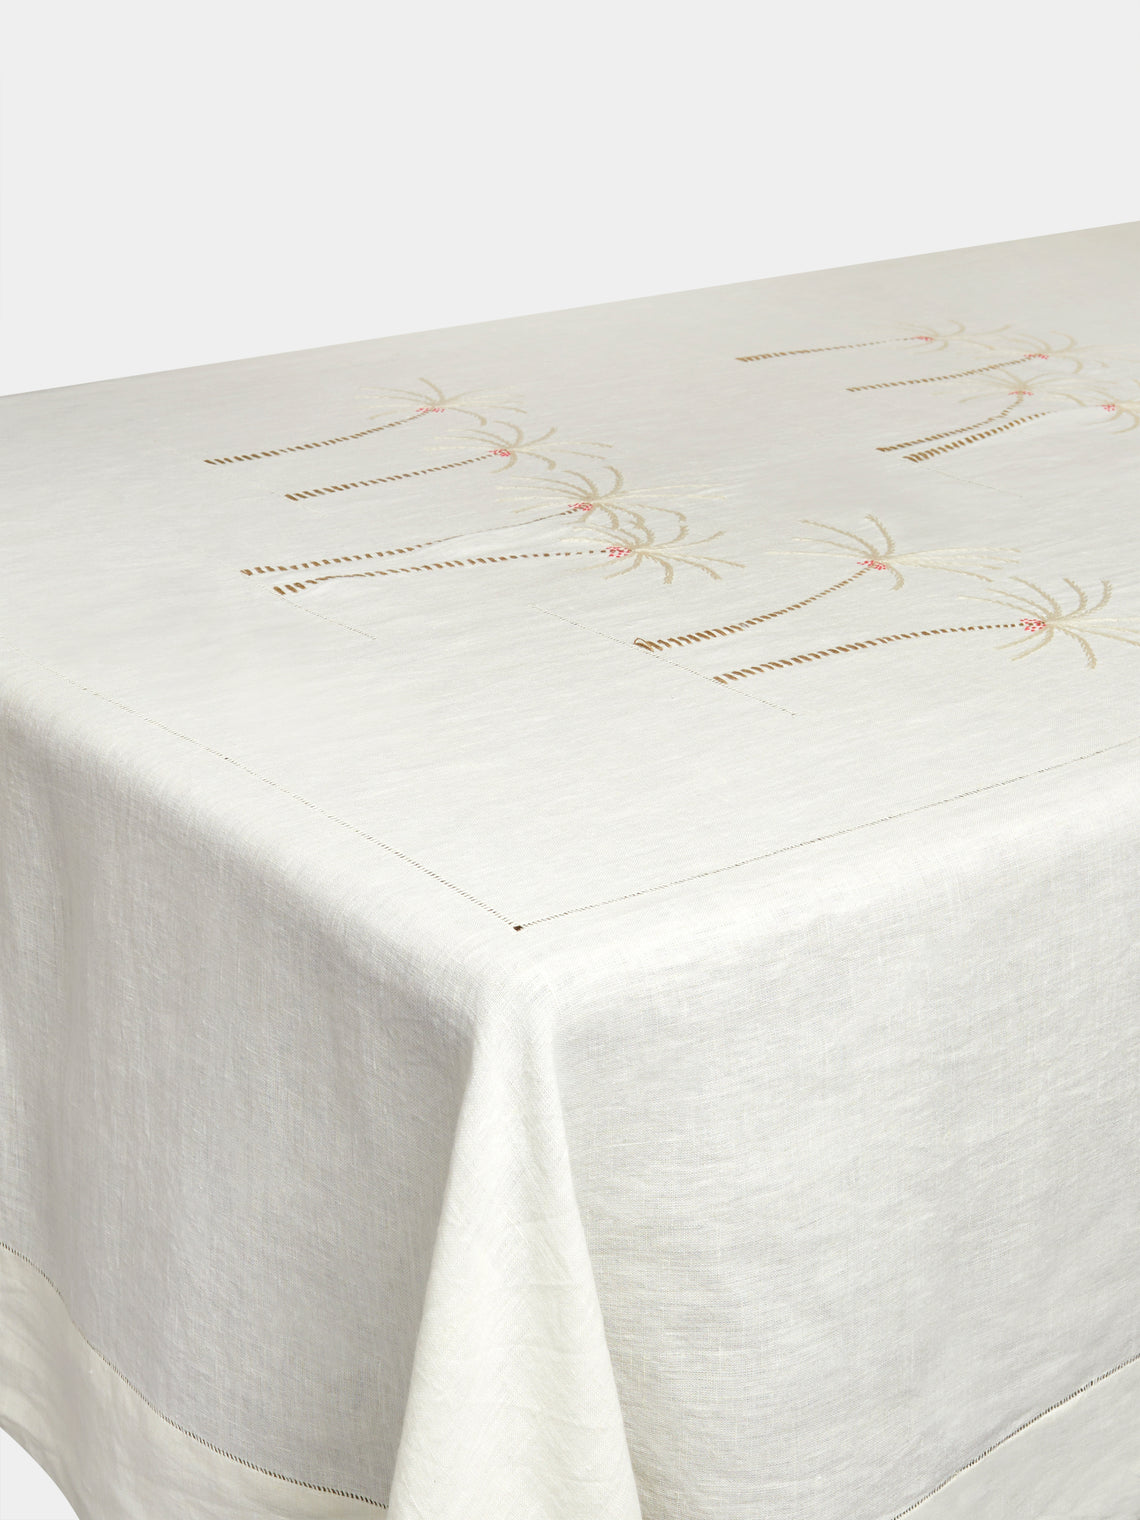 Malaika - Palm Tree Hand-Embroidered Linen Rectangular Tablecloth - Red - ABASK